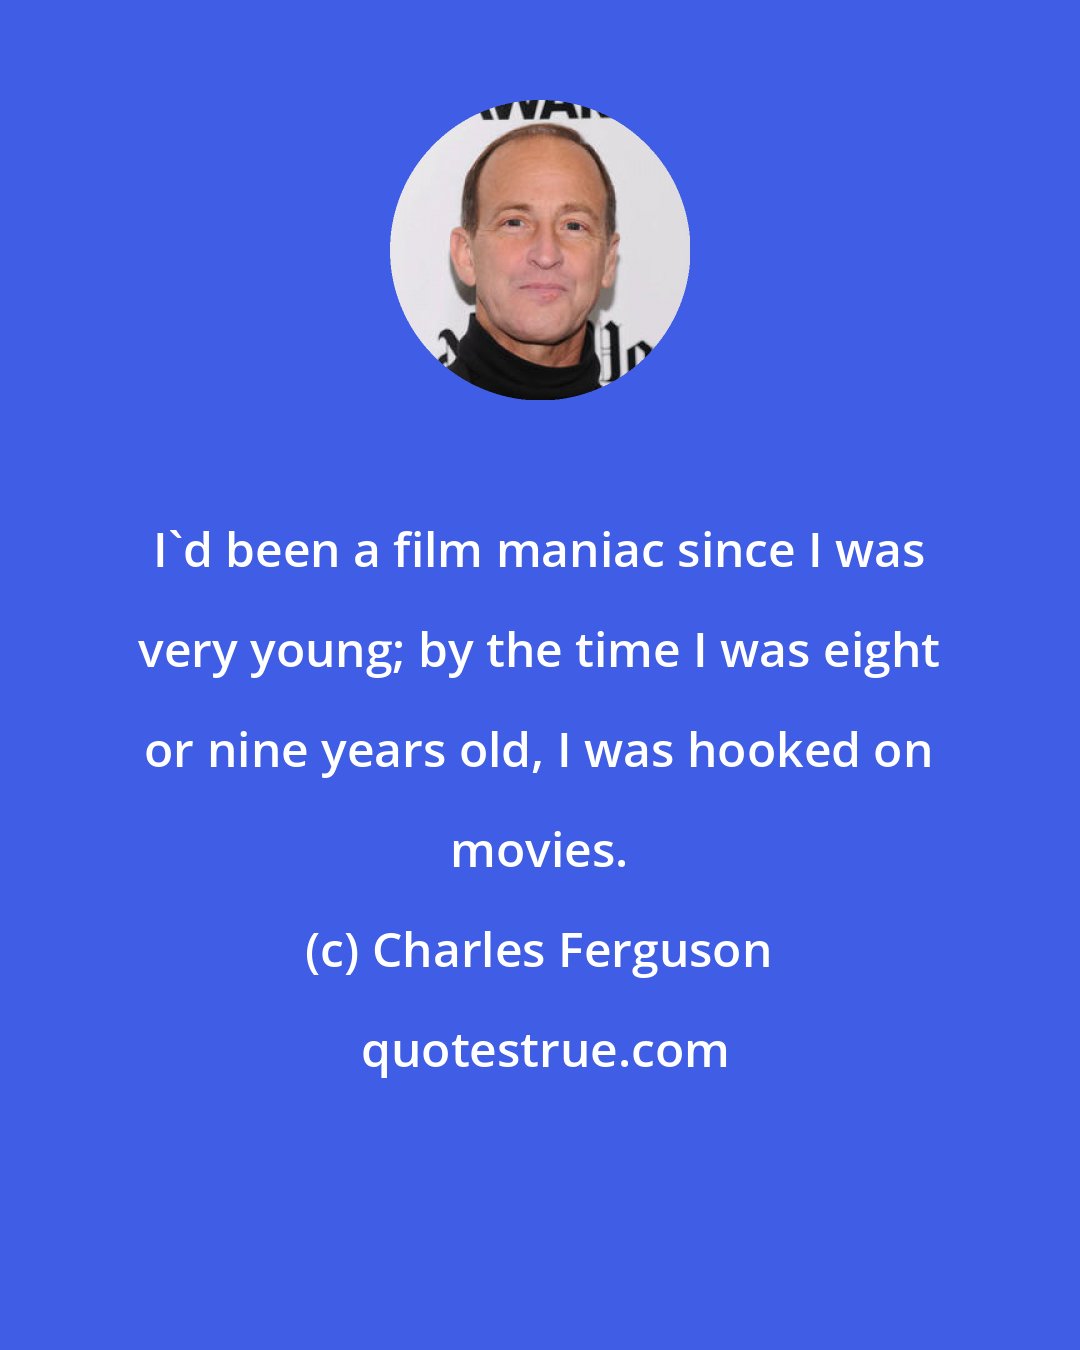 Charles Ferguson: I'd been a film maniac since I was very young; by the time I was eight or nine years old, I was hooked on movies.